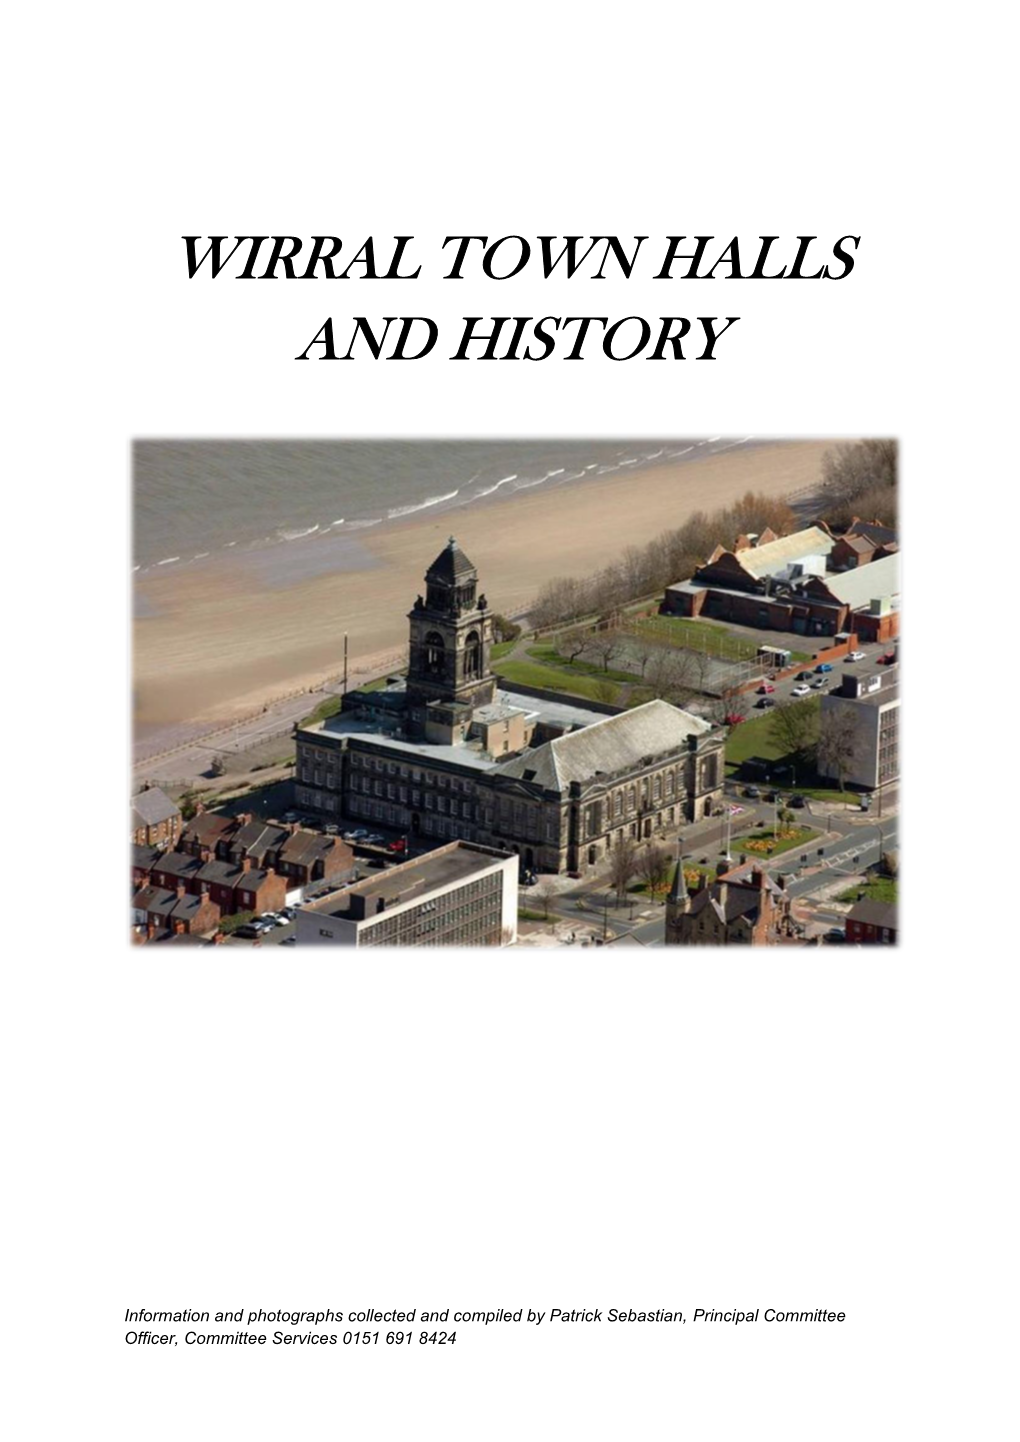 Wirral Town Halls and History